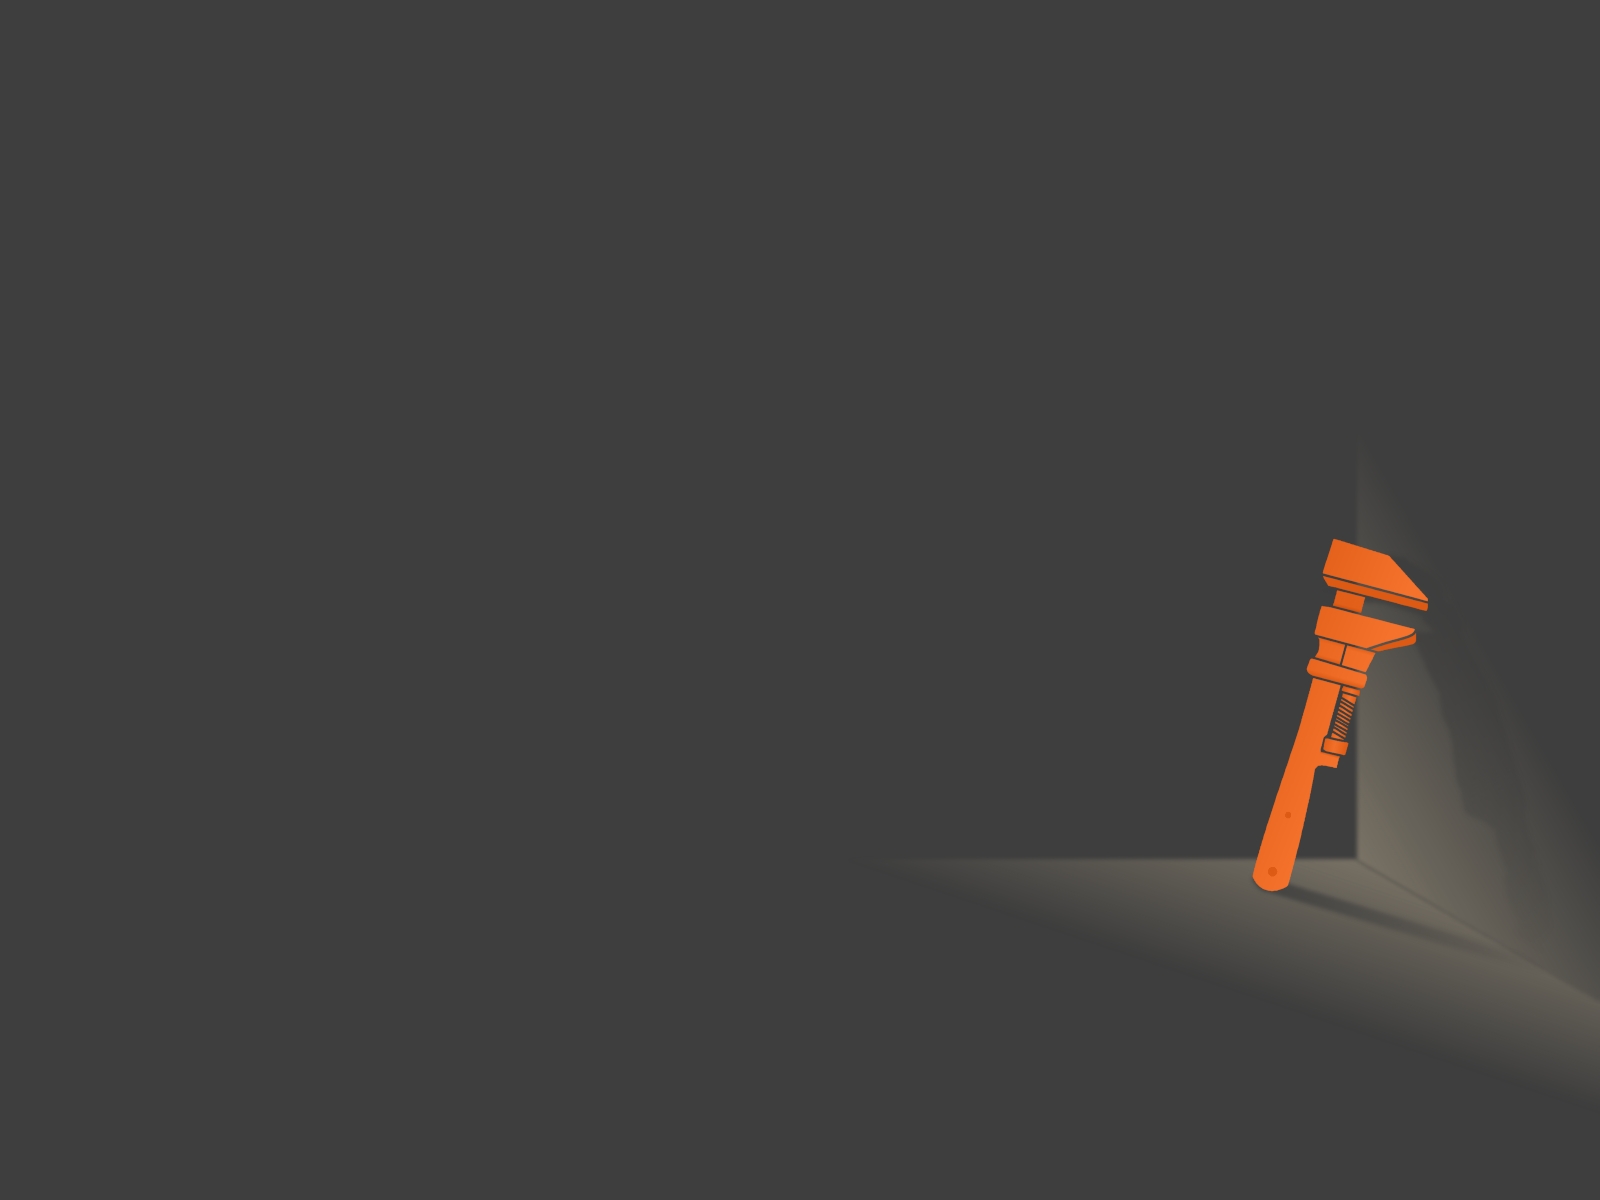 Engineer Tf2 Wallpaper Wrench Team Fortress